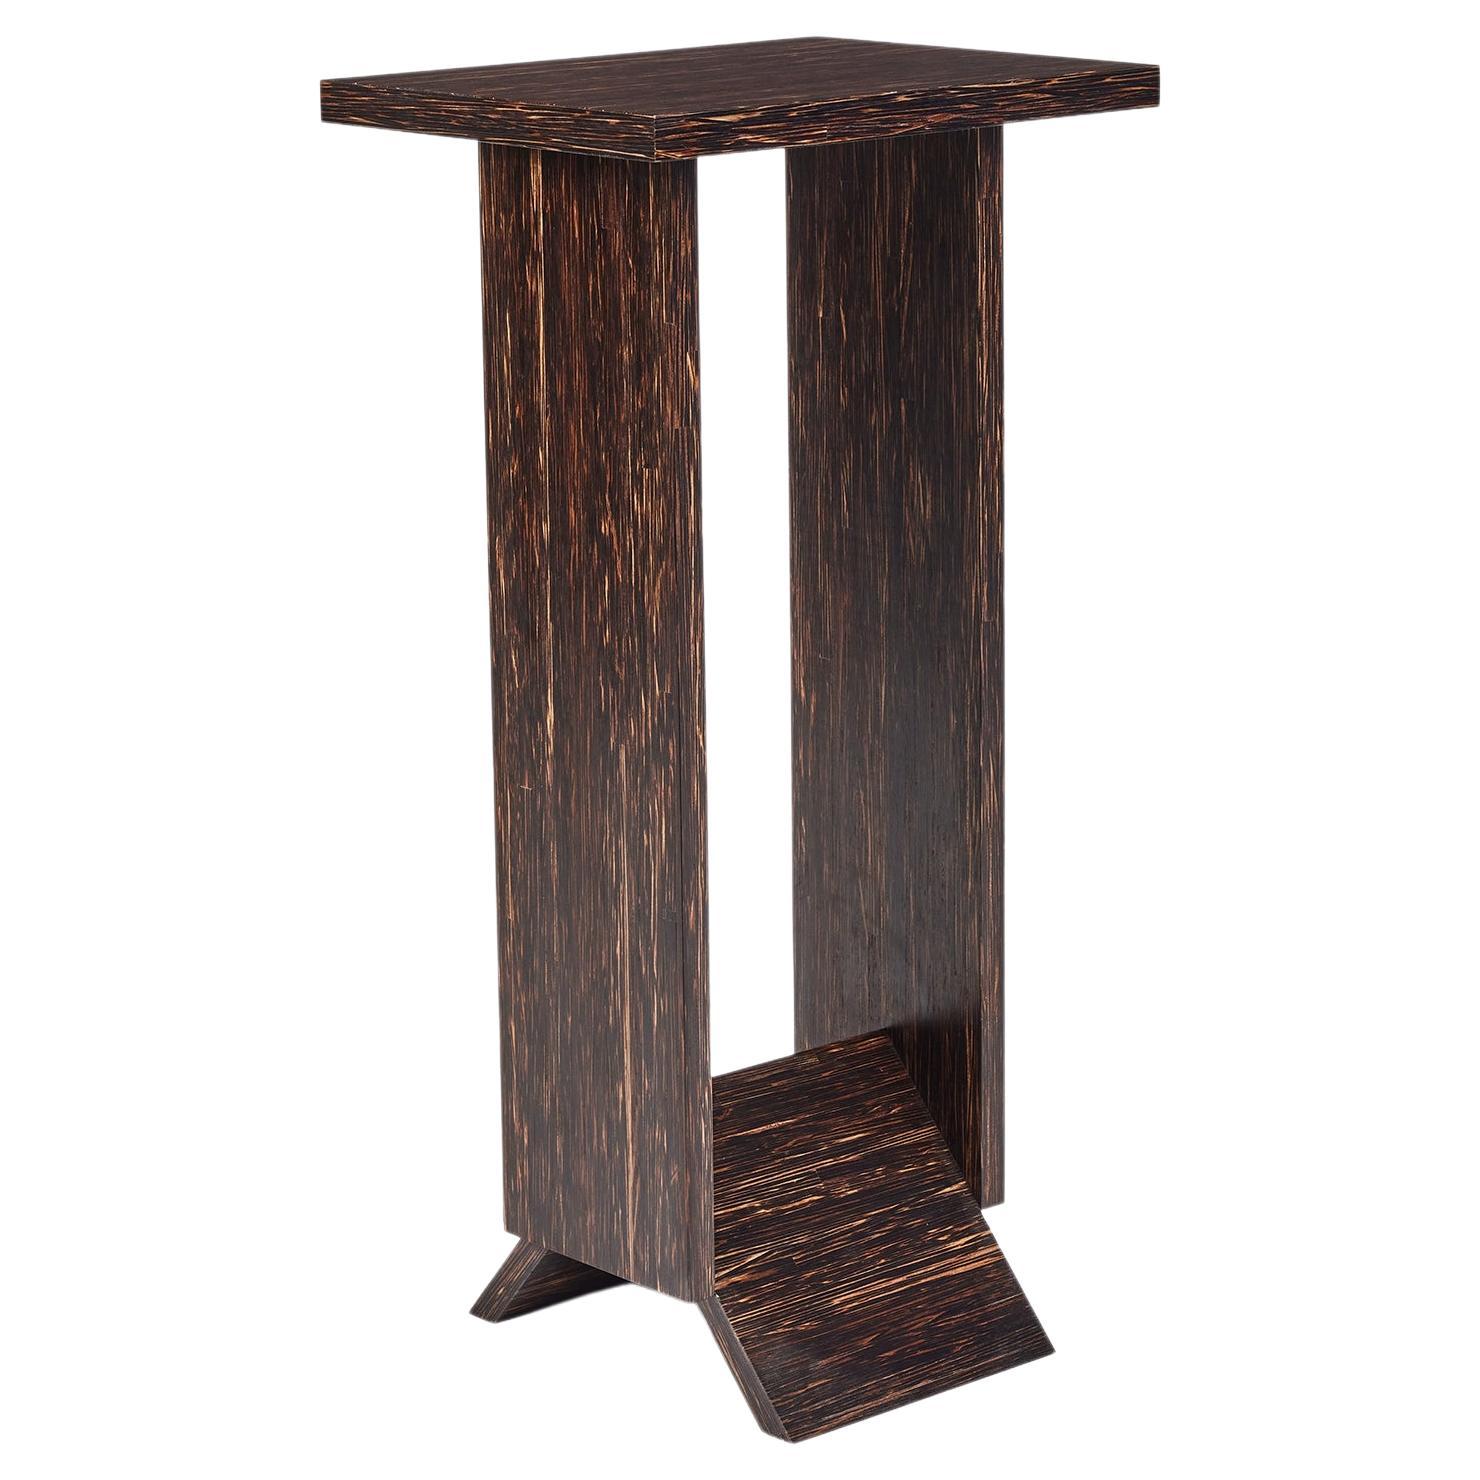 'Hotel de Tour' Palm Wood Pedestal Table in the Manner of Pierre Chareau